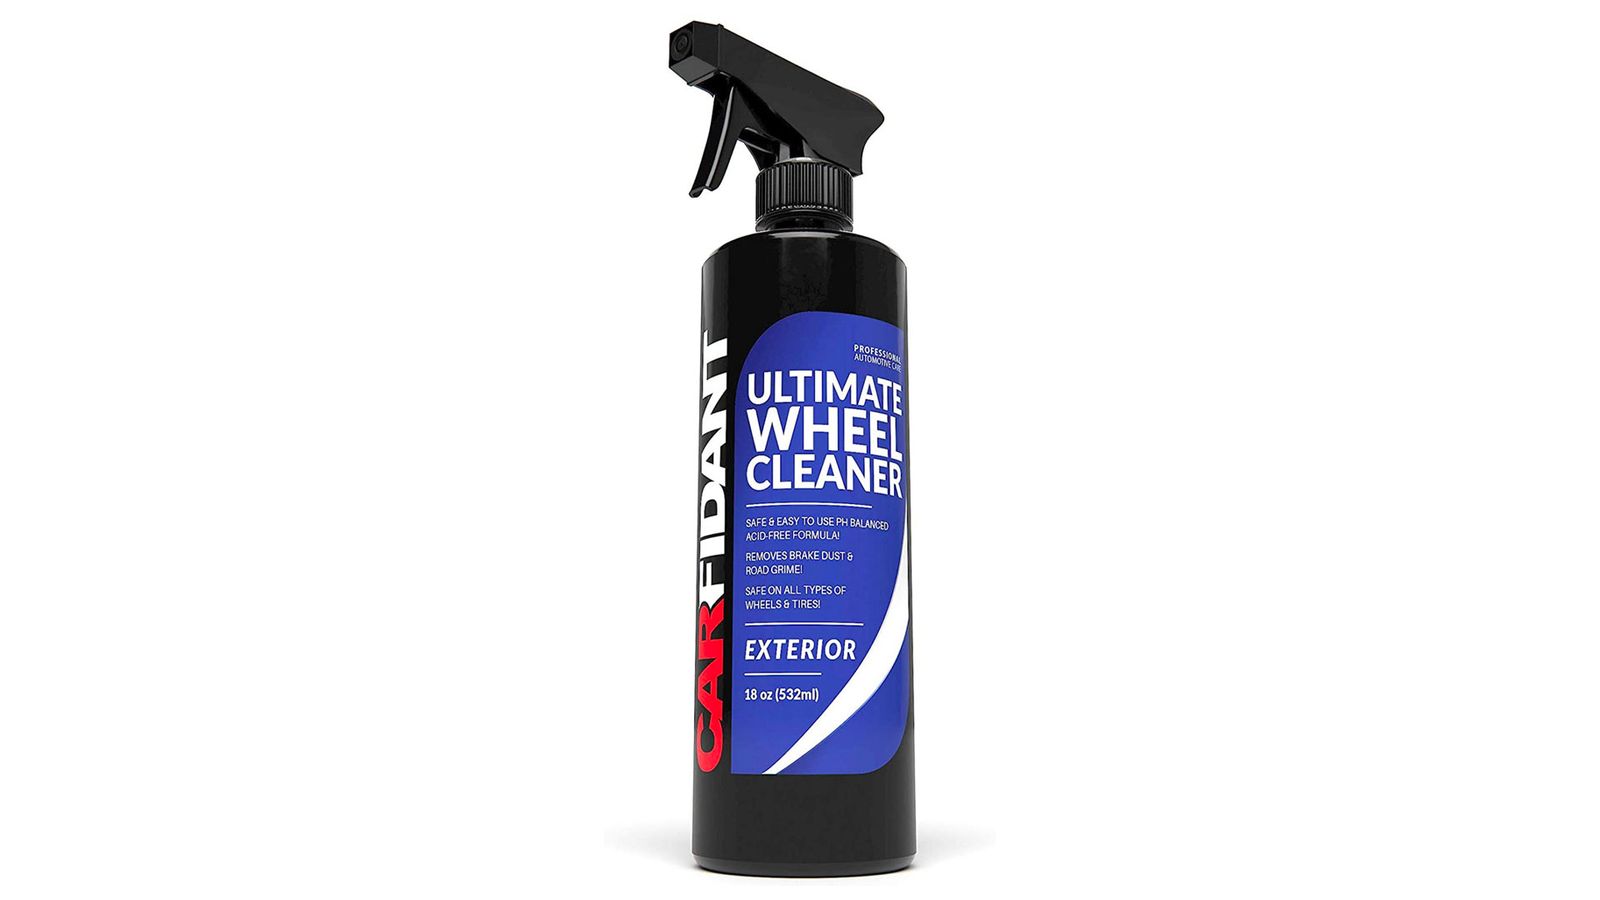 Carfidant Ultimate Wheel Cleaner product image of a black spray bottle with a blue label.